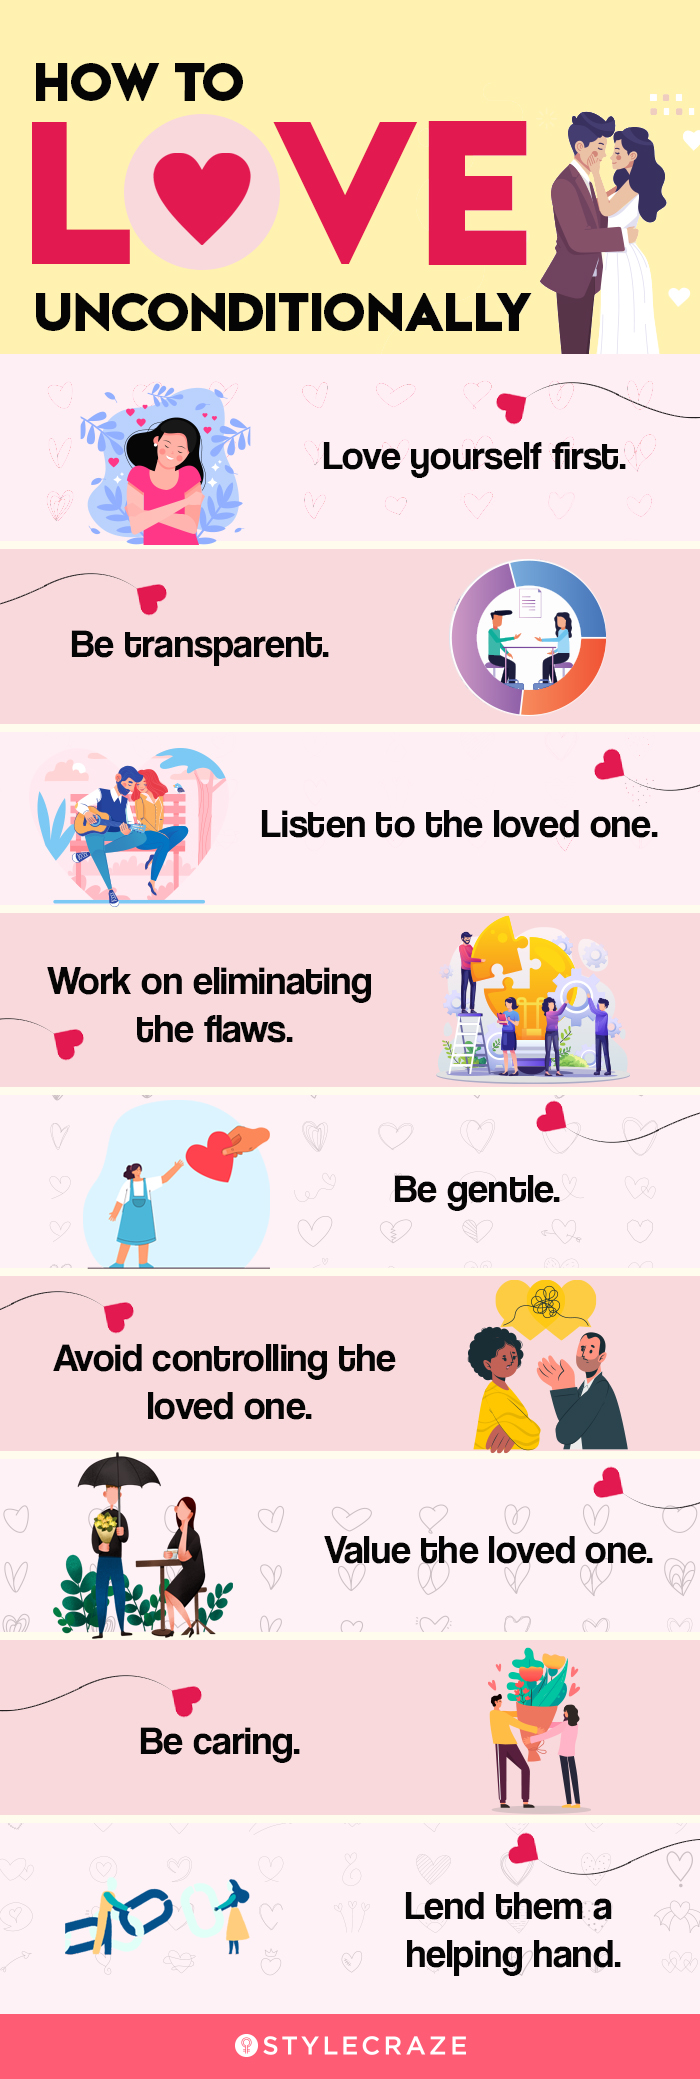 how to love unconditionally (infographic)